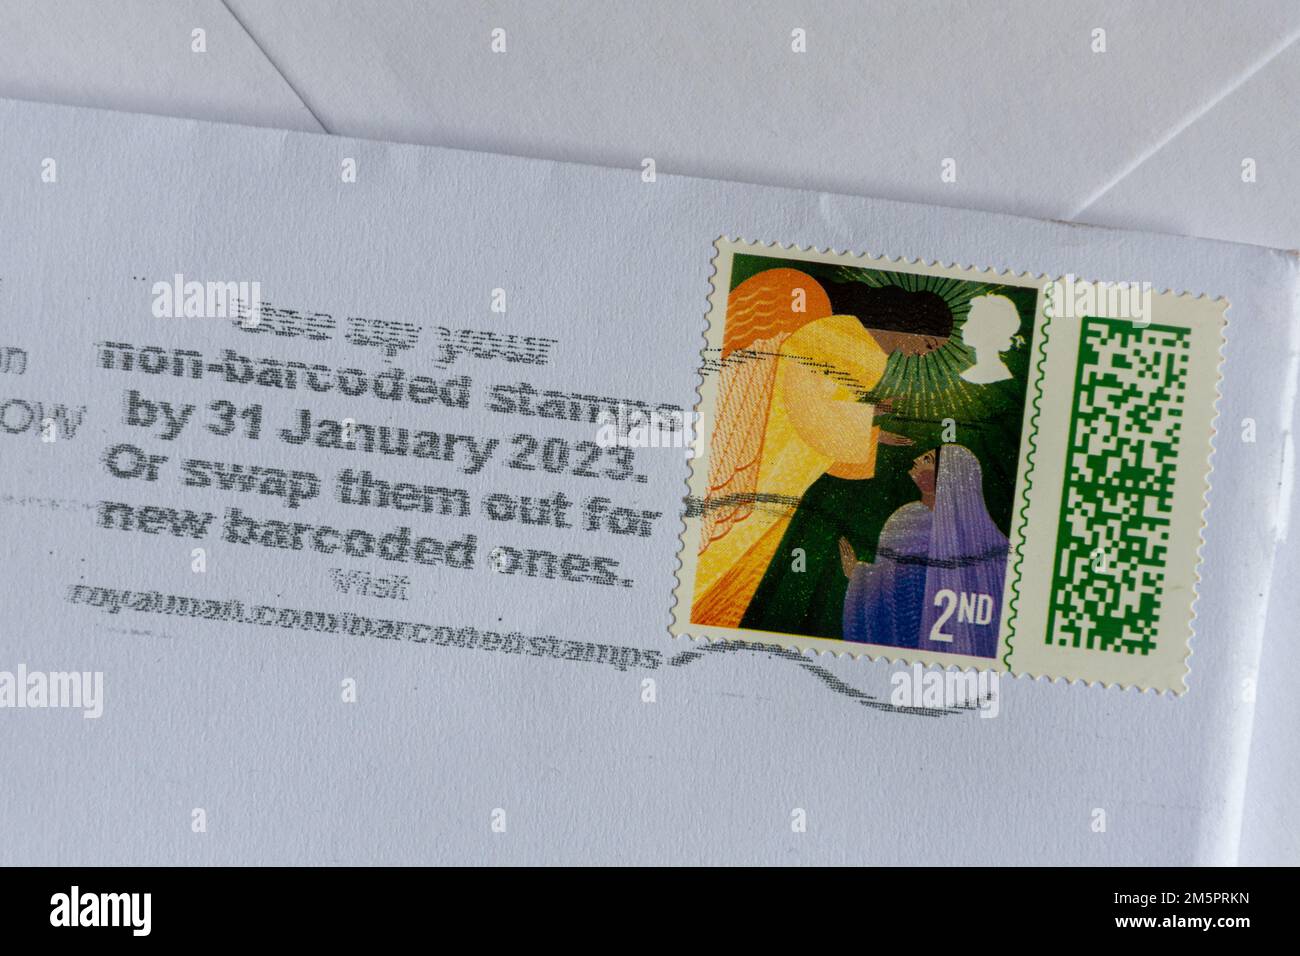 Use up your non-barcoded stamps by 31 January 2023 or swap them our for new barcoded ones, information stamped onto envelopes by Royal Mail, UK Stock Photo